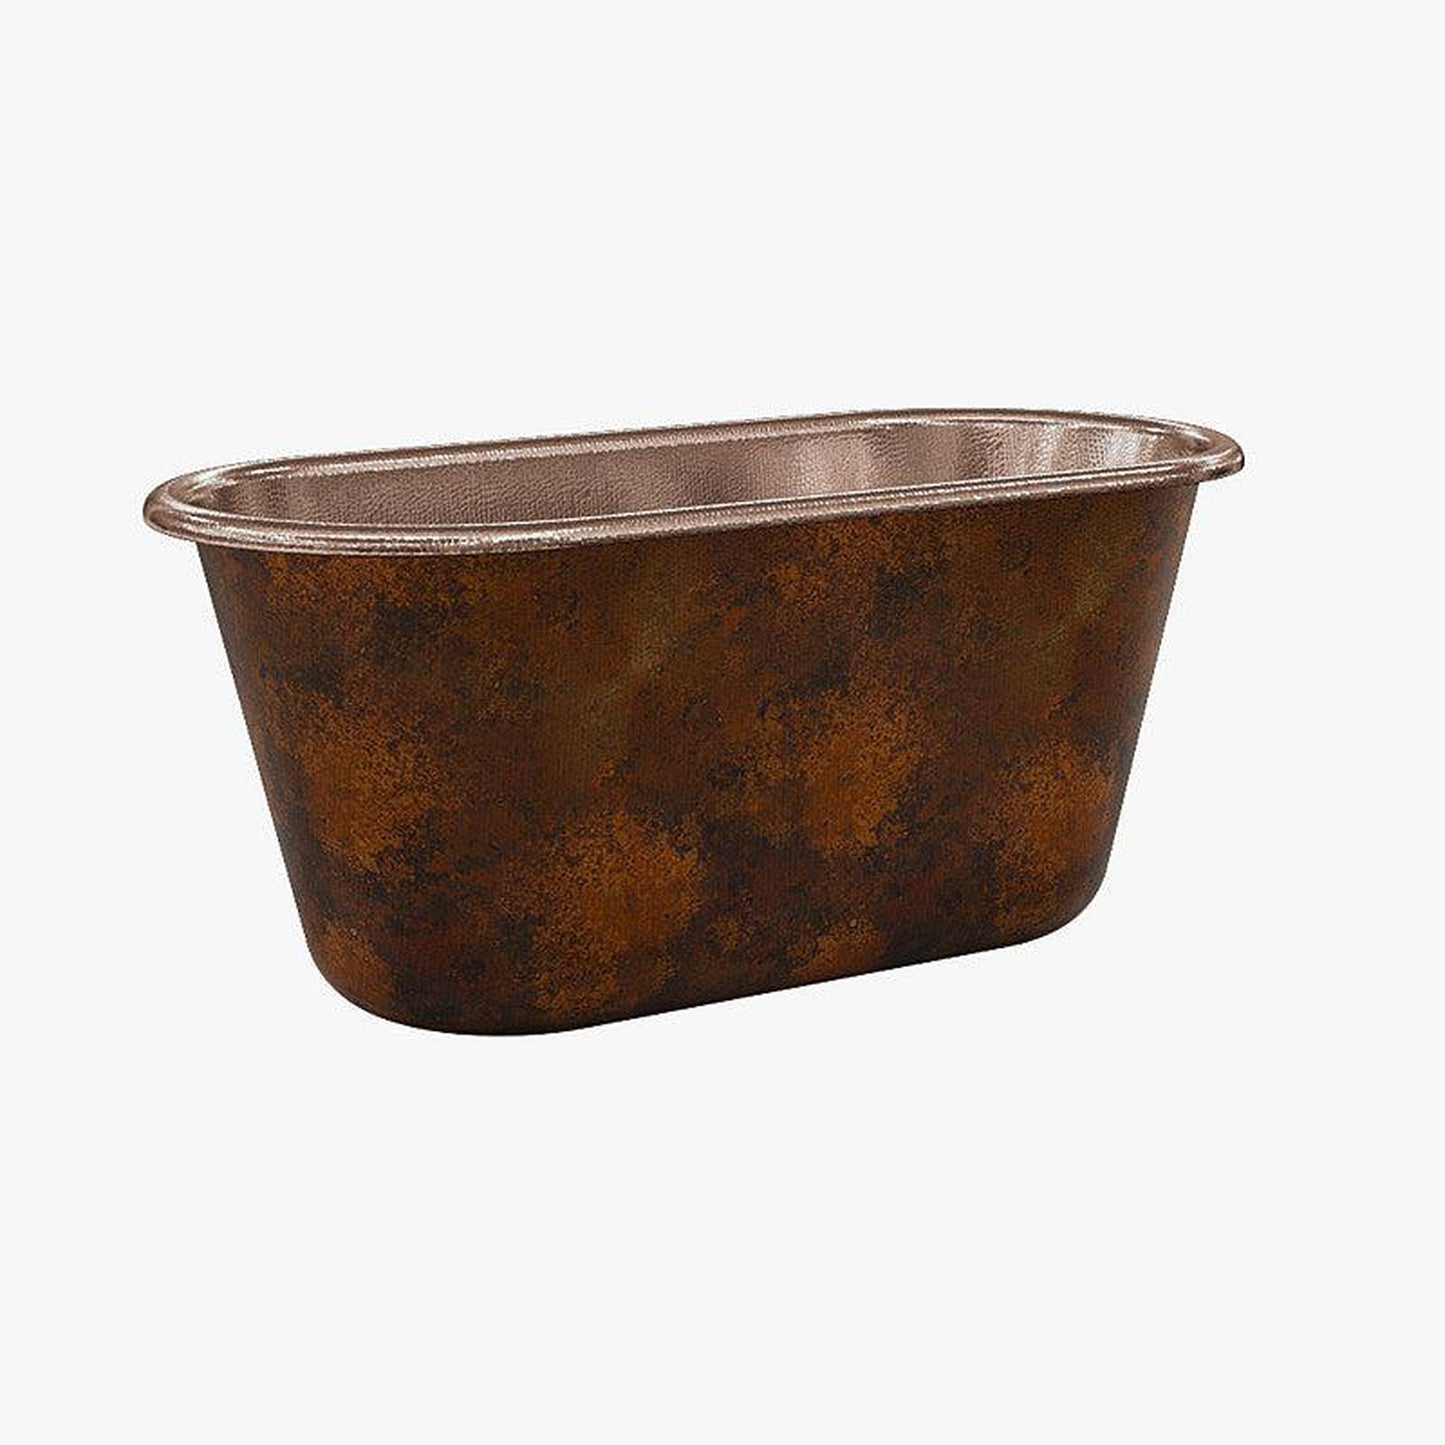 CopperSmith Heritage HX1 60" x 31" x 31" 14-Gauge Fire Copper Freestanding Bathtub With Polished Copper Interior and Polished Brass Overflow Drain and Oil Rubbed Bronze Tub Filler